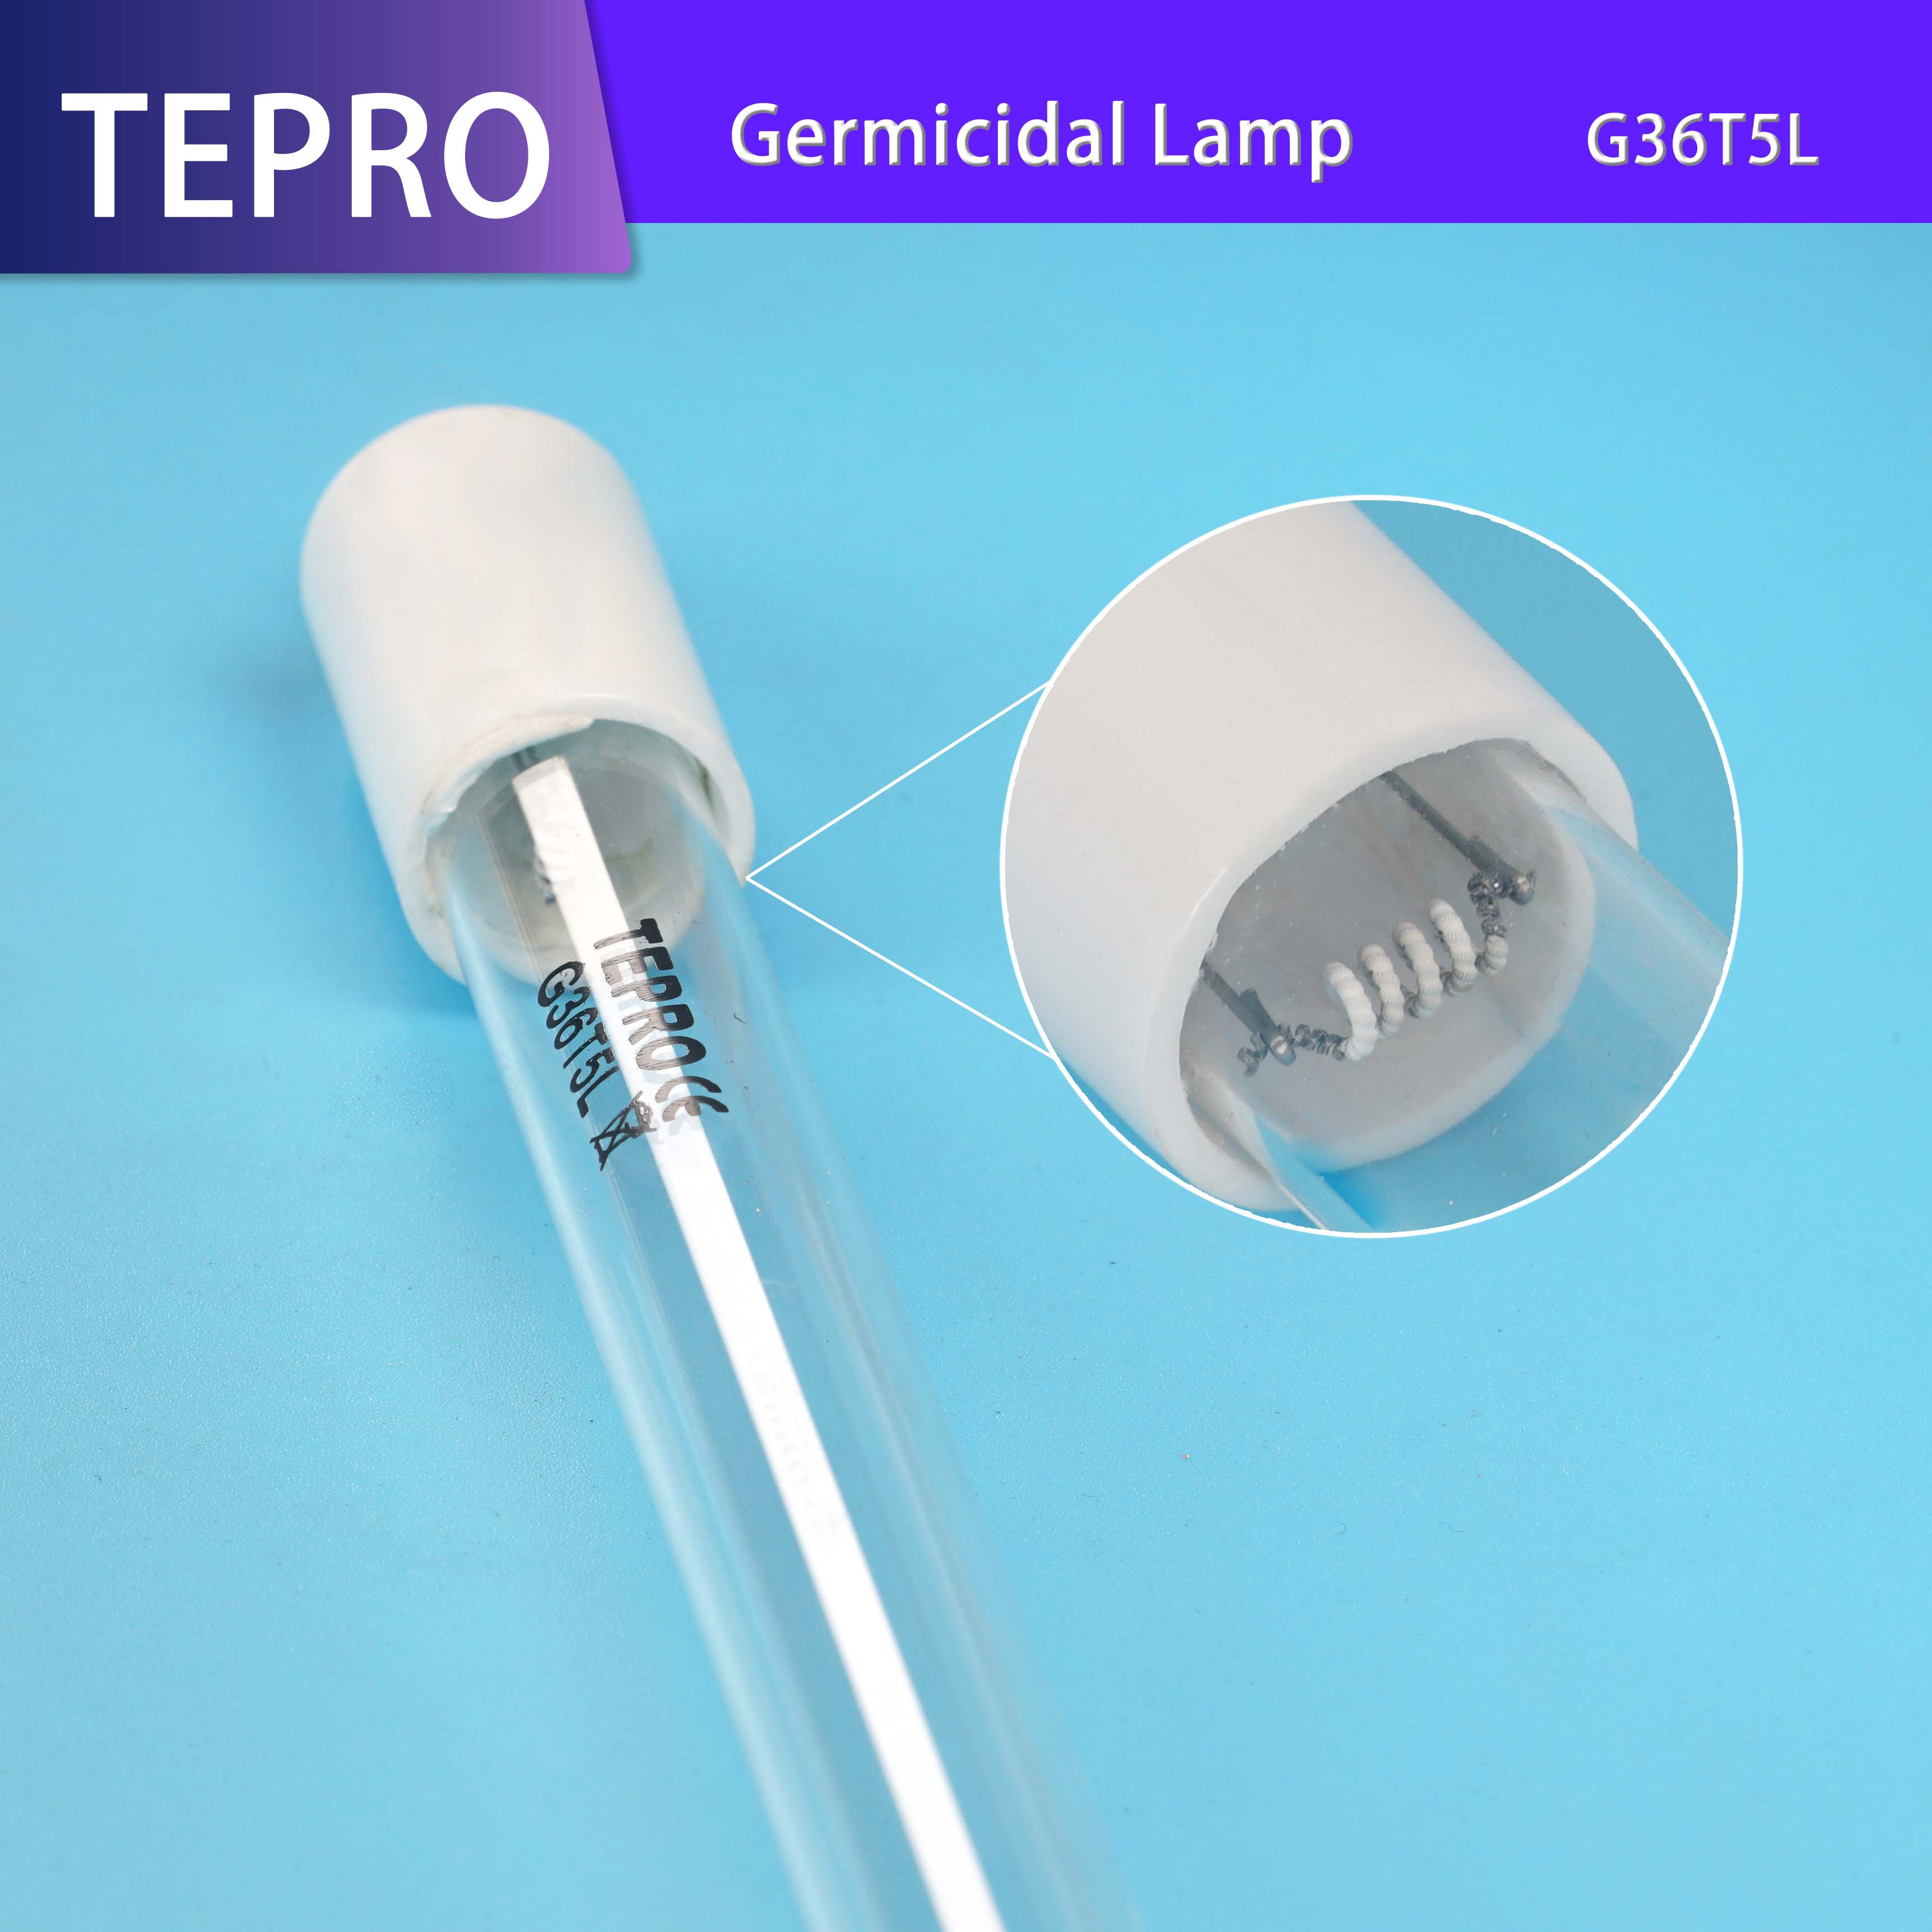 news-quality gel nail lamp manufacturer for nails-Tepro-img